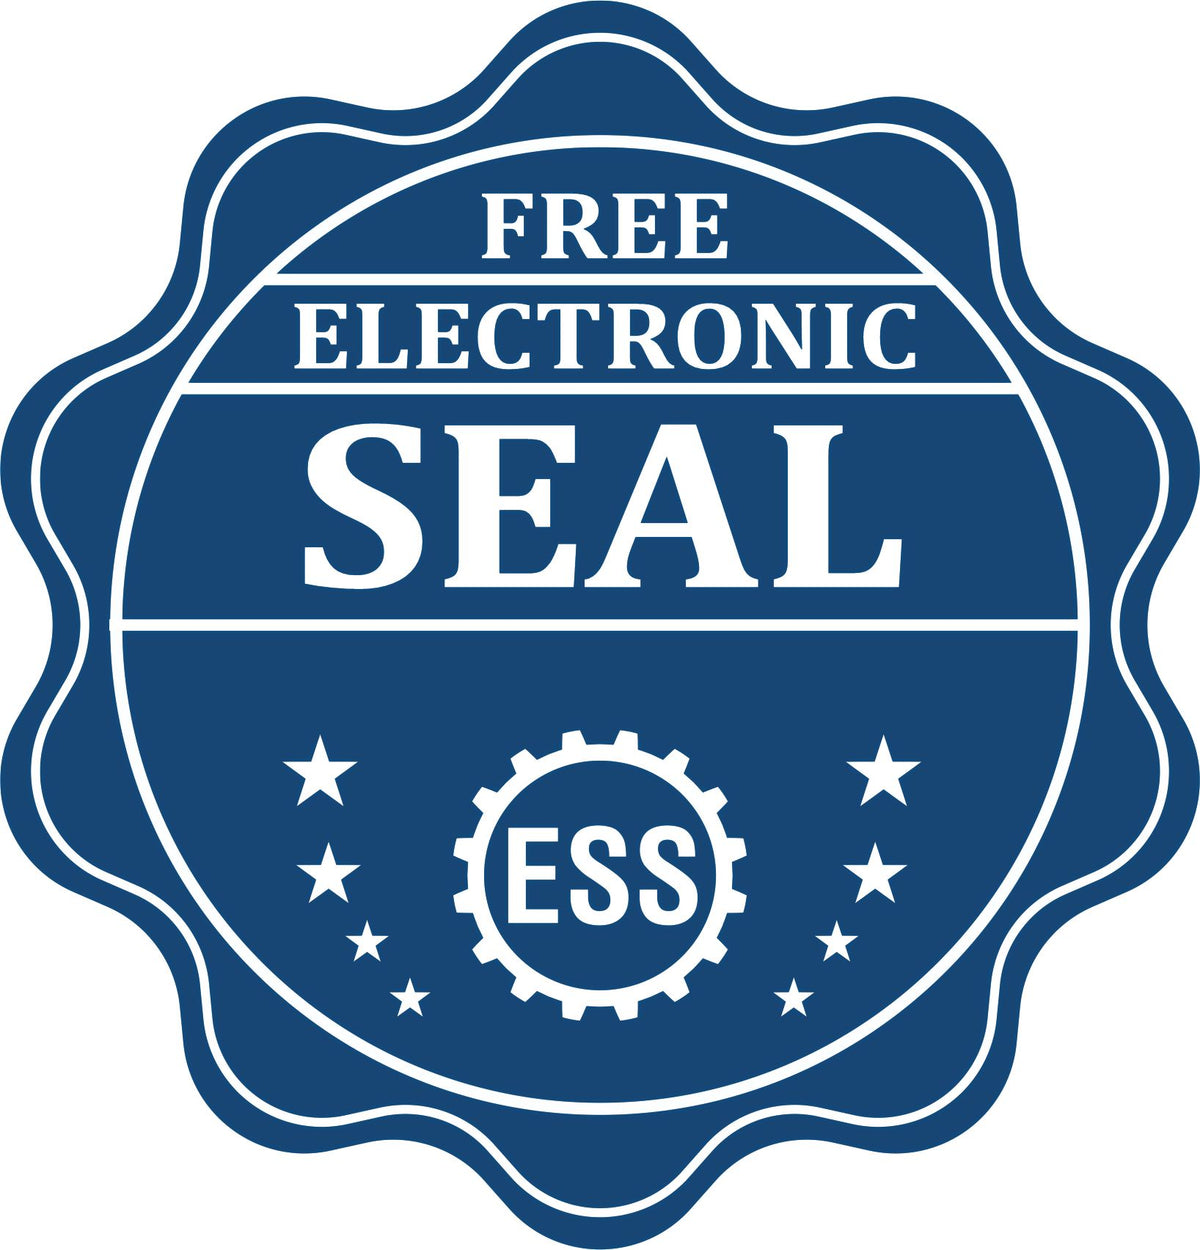 A badge showing a free electronic seal for the PSI Arkansas Notary Stamp with stars and the ESS gear on the emblem.